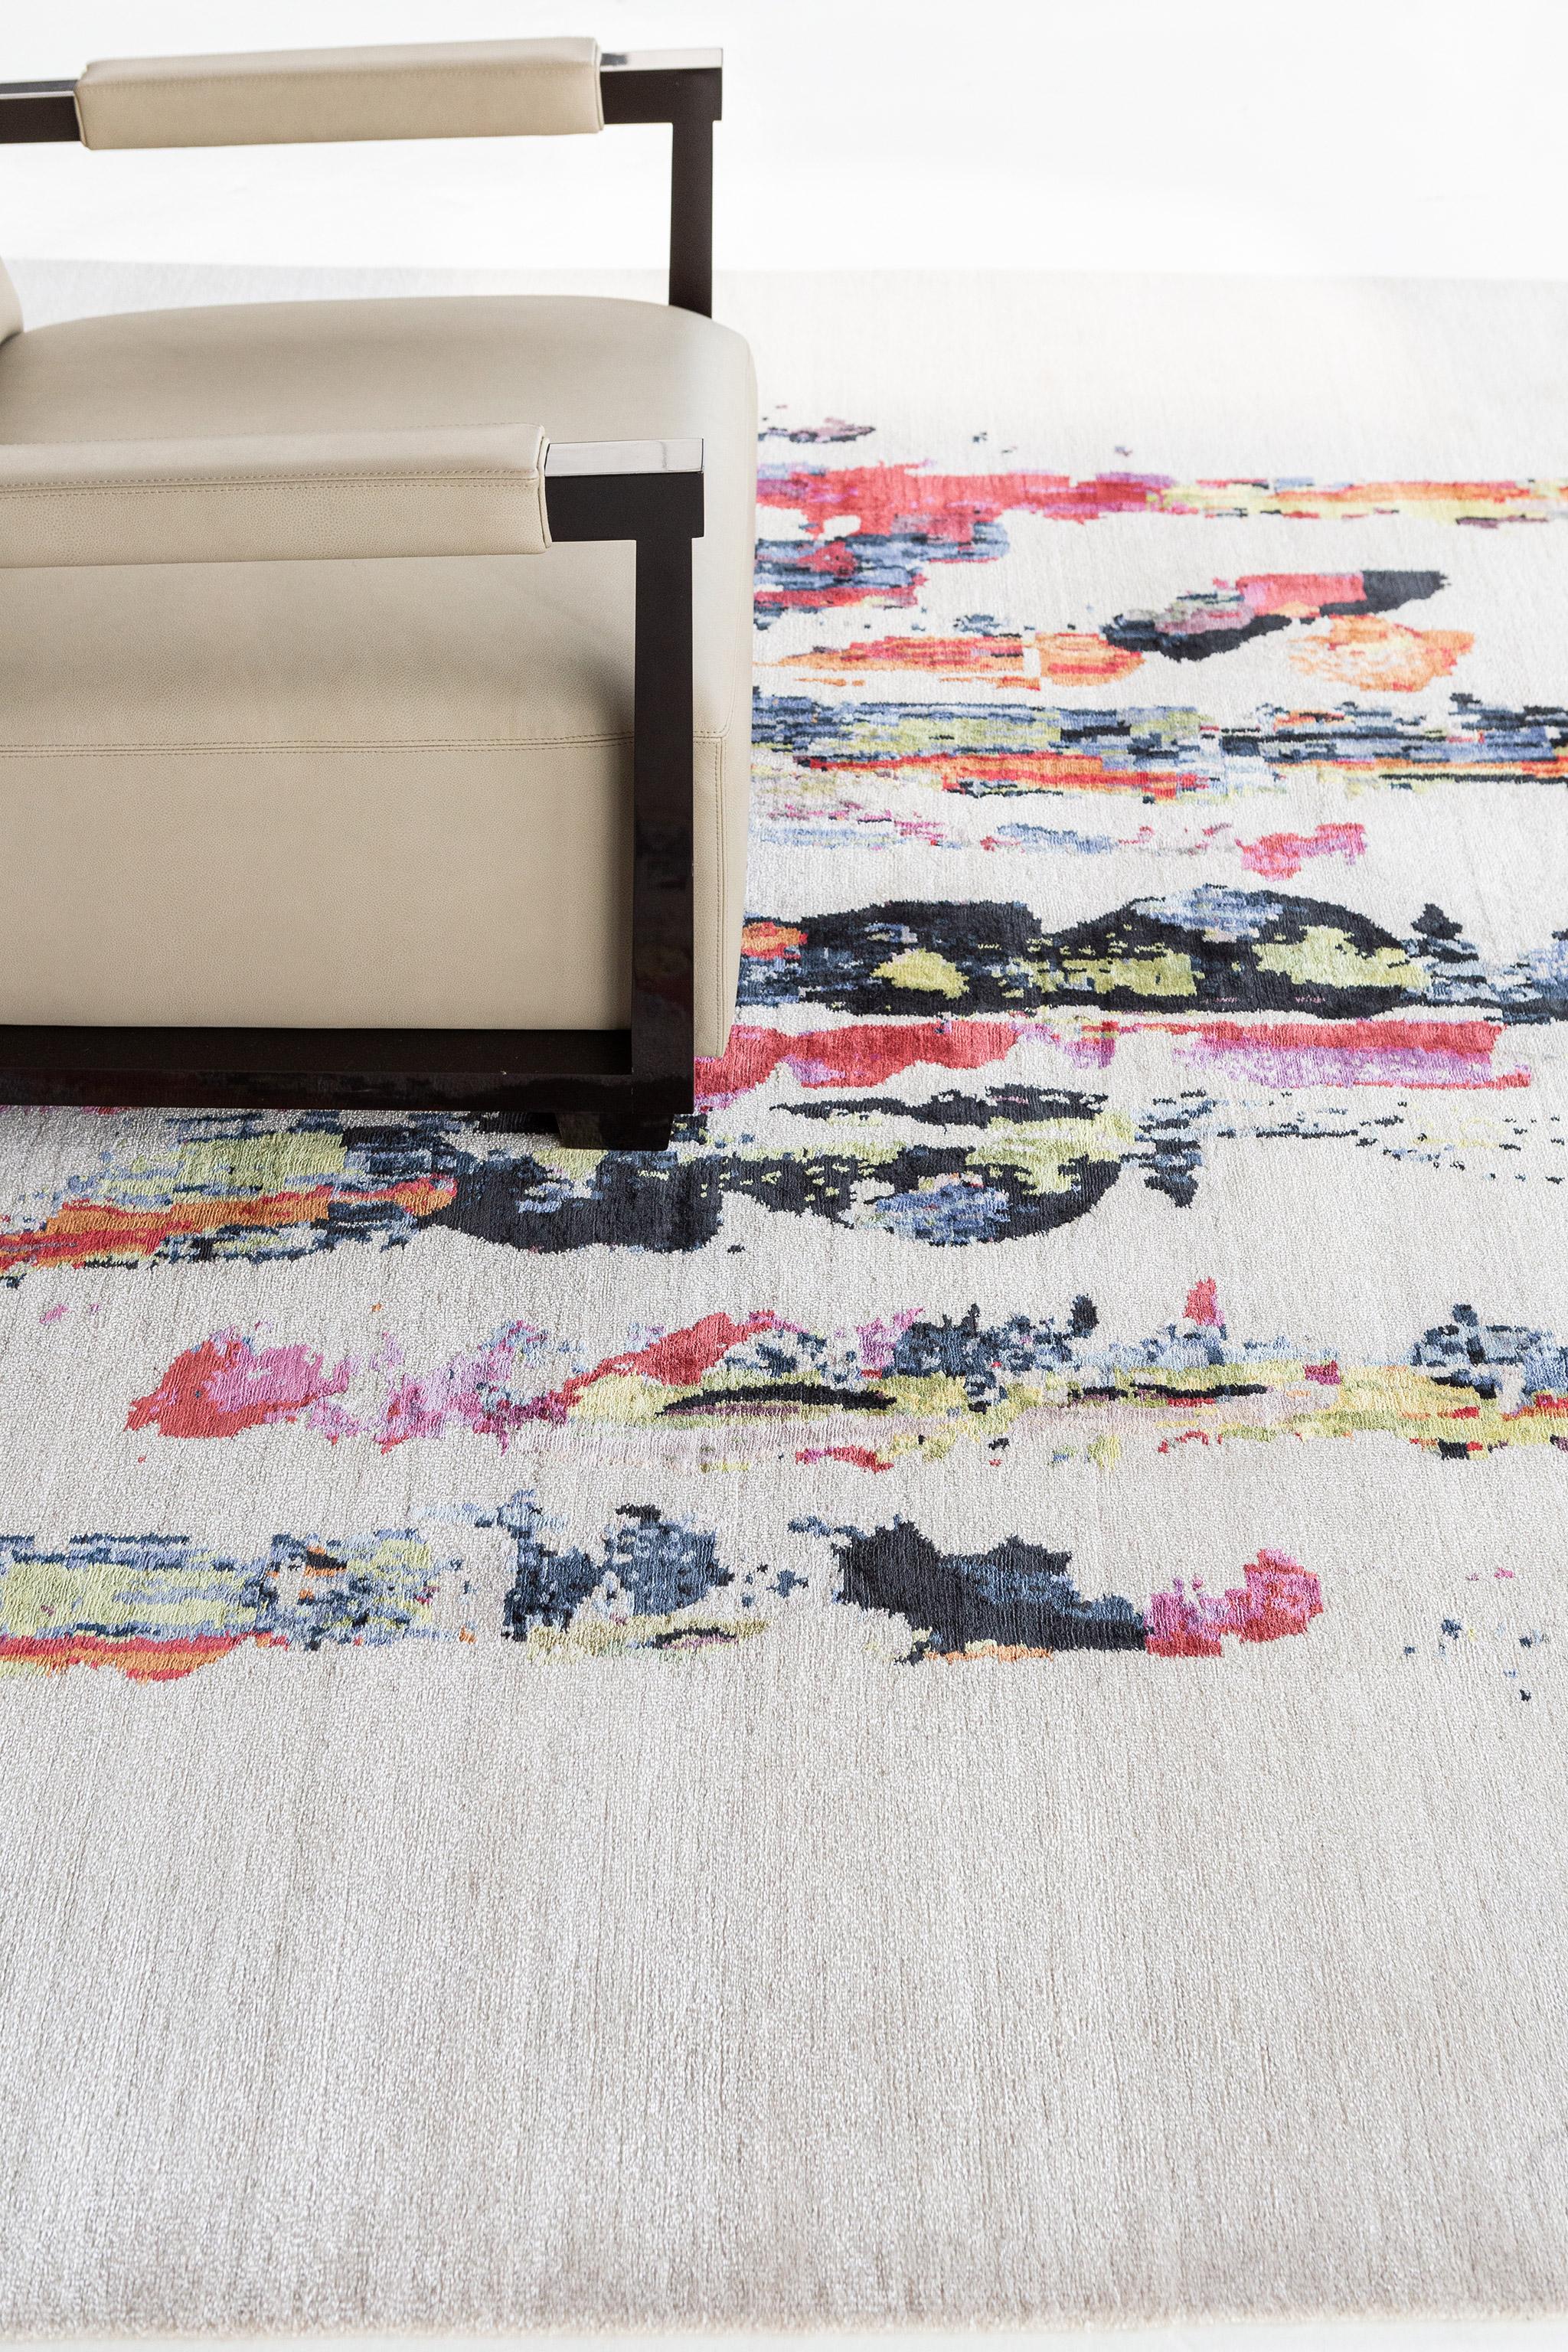 The eight carpets in the collection are inspired by how human beings express themselves: language, poetry, art, and architecture. Bisous is intended as a celebration--exultation--shared through original artwork, expertly translated into fine rugs.